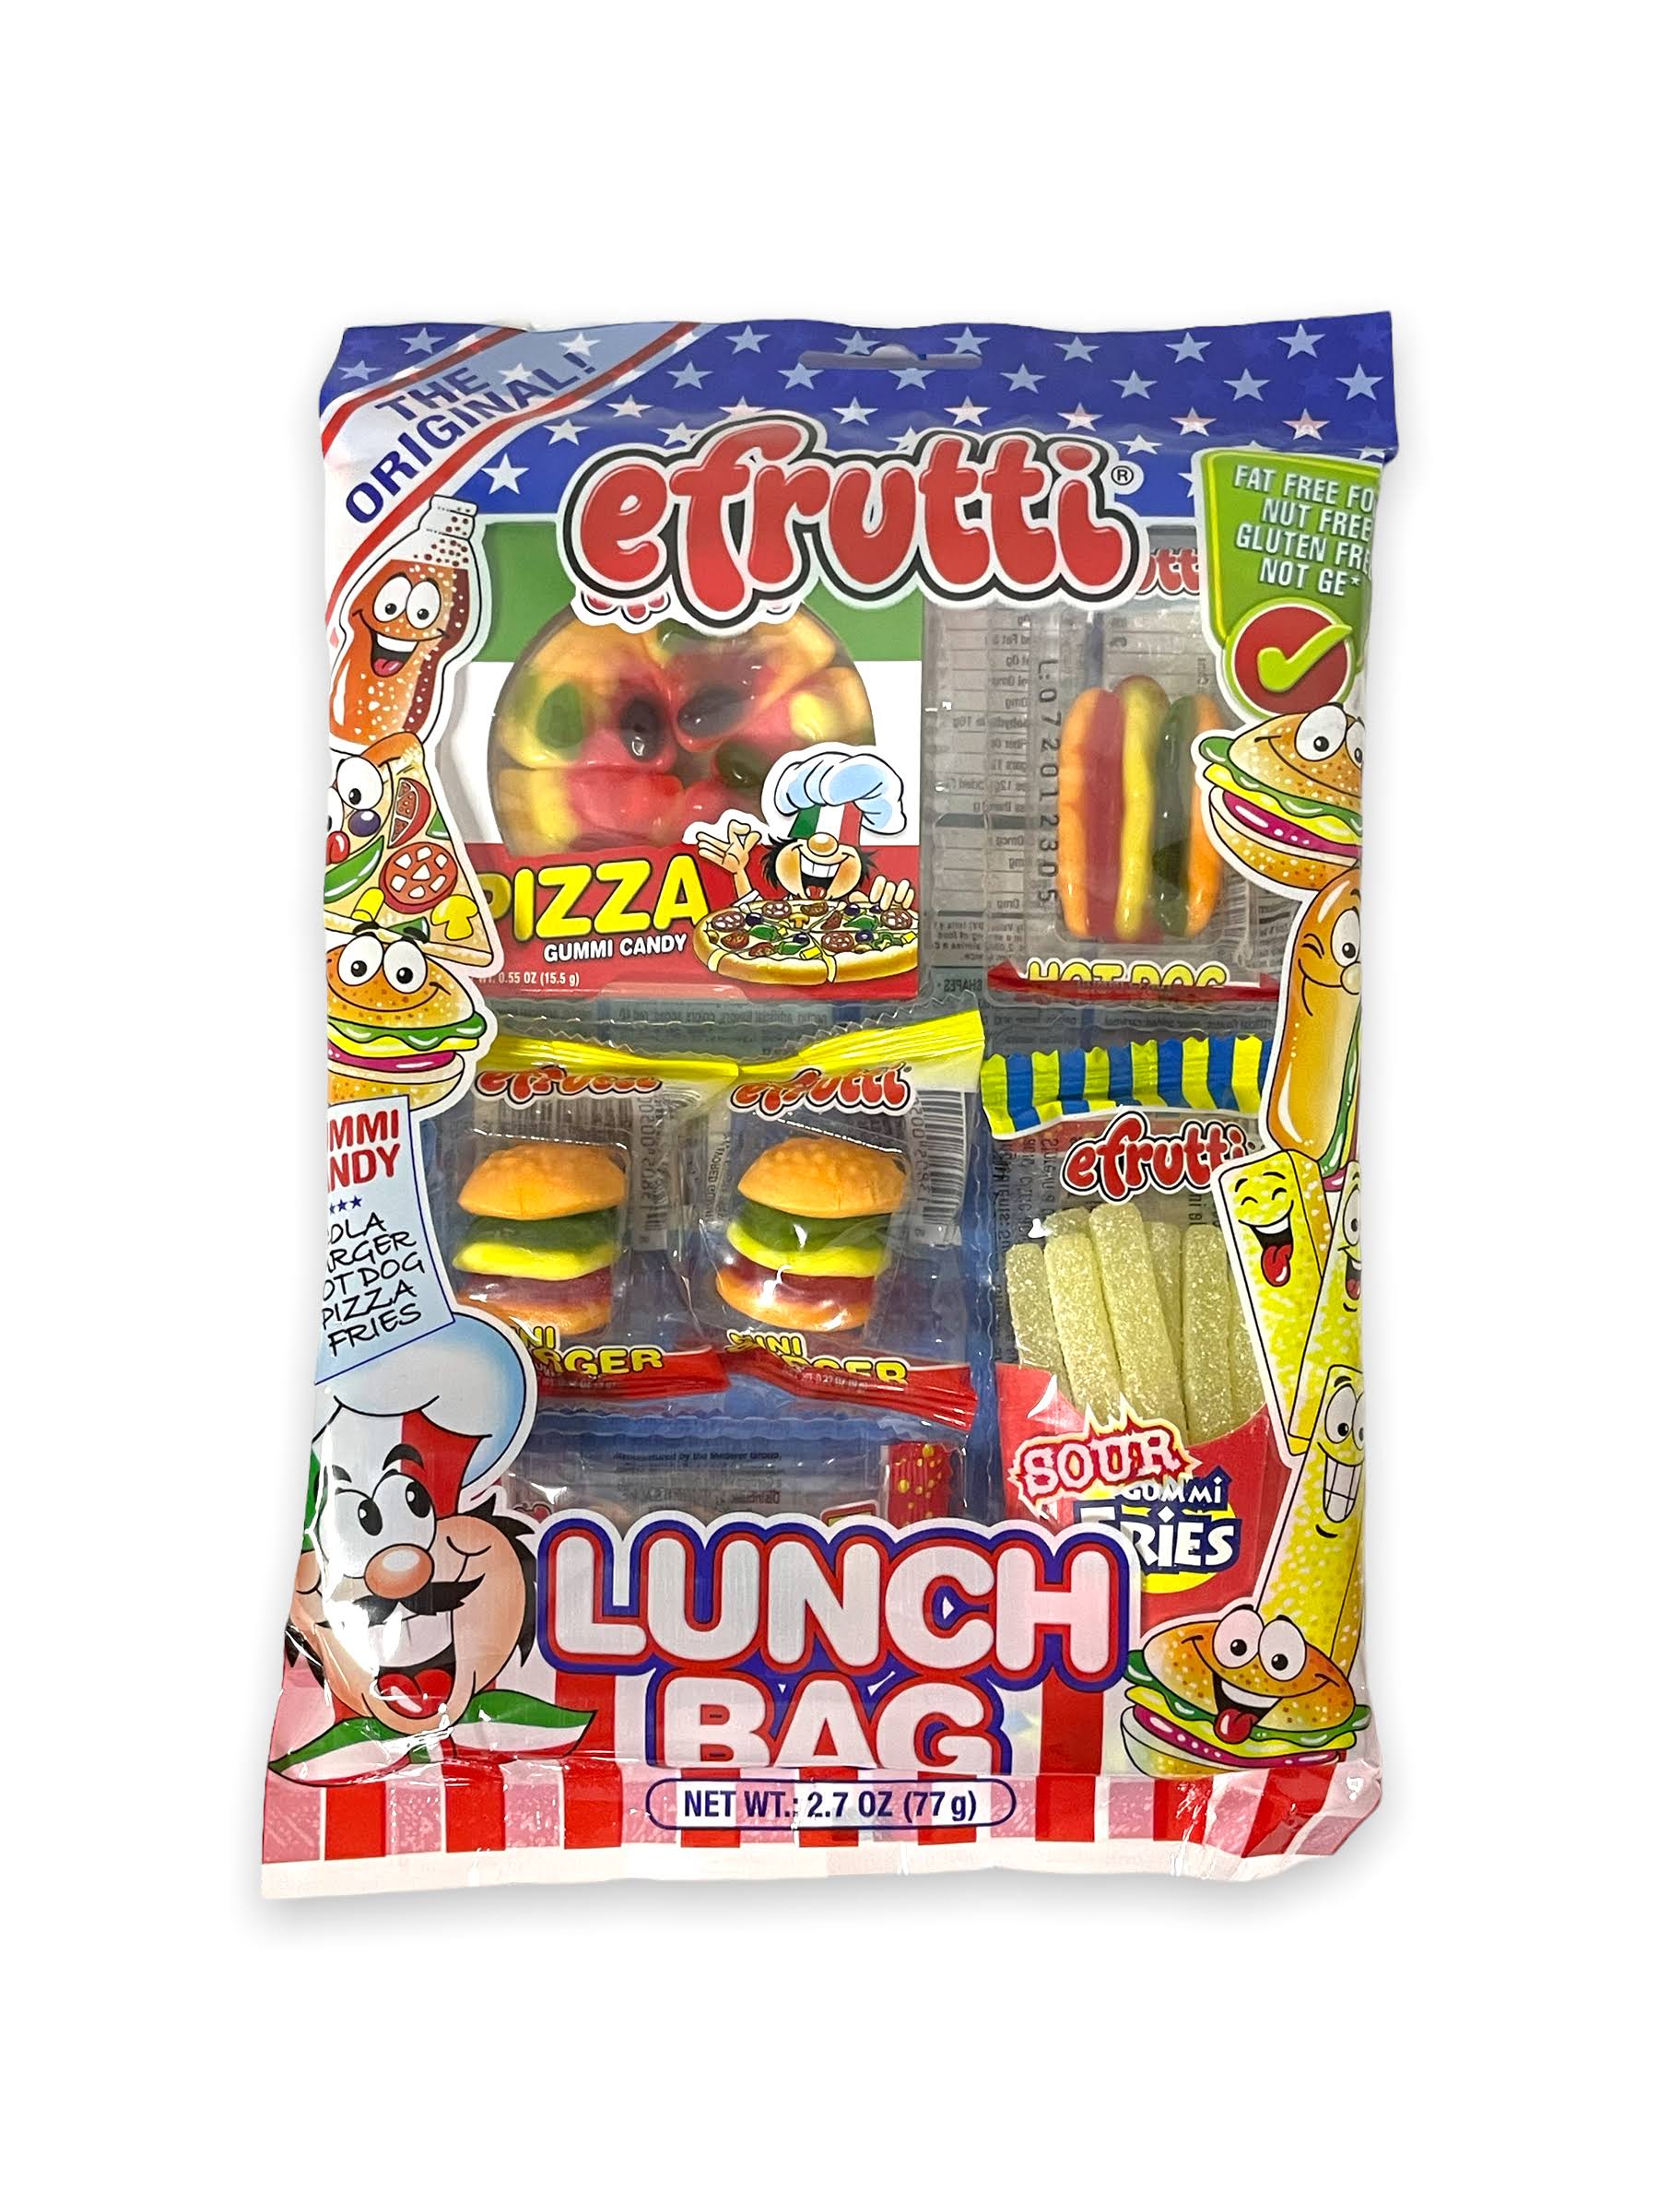 E-Frutti Gummi Candy Lunch Bags - Gummy Burgers, Hot dogs, Fries, Cola